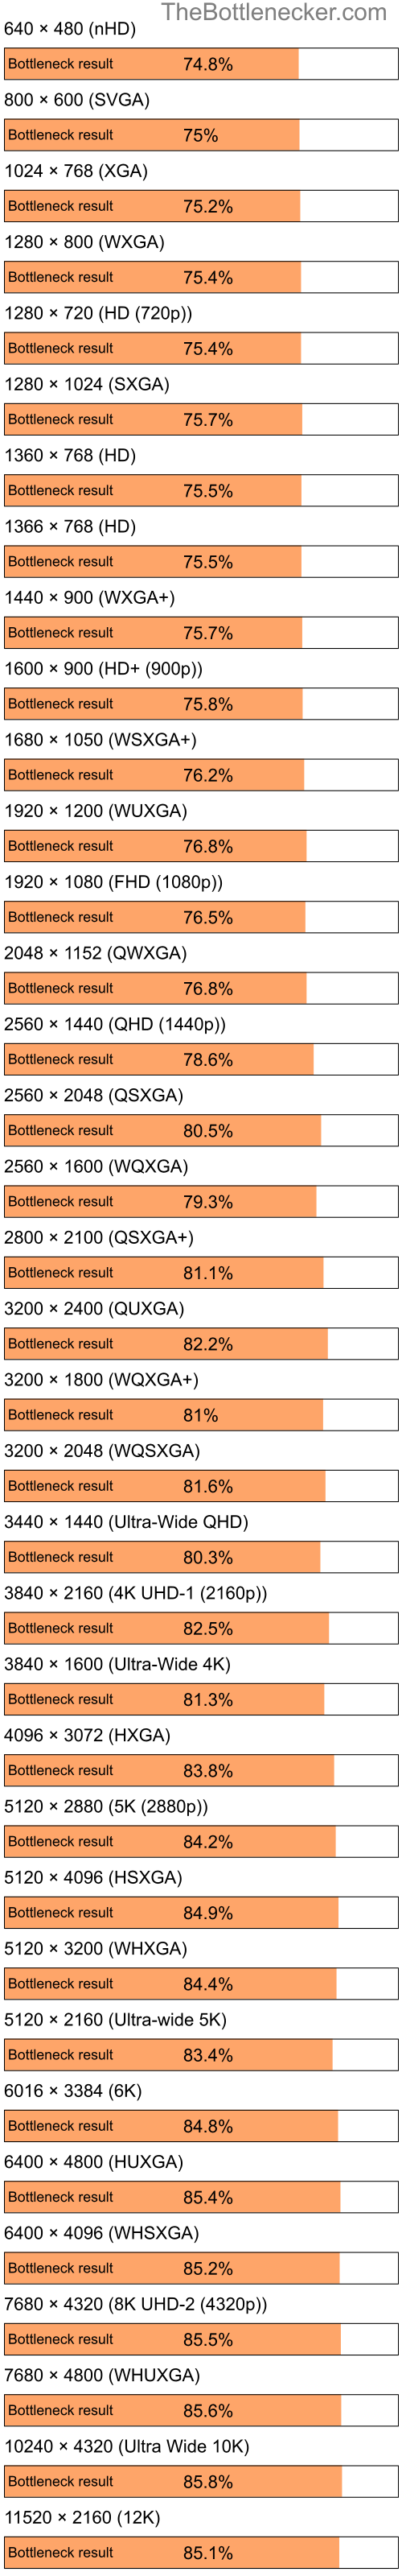 Bottleneck results by resolution for Intel Pentium 4 and AMD Mobility Radeon X1350 in General Tasks